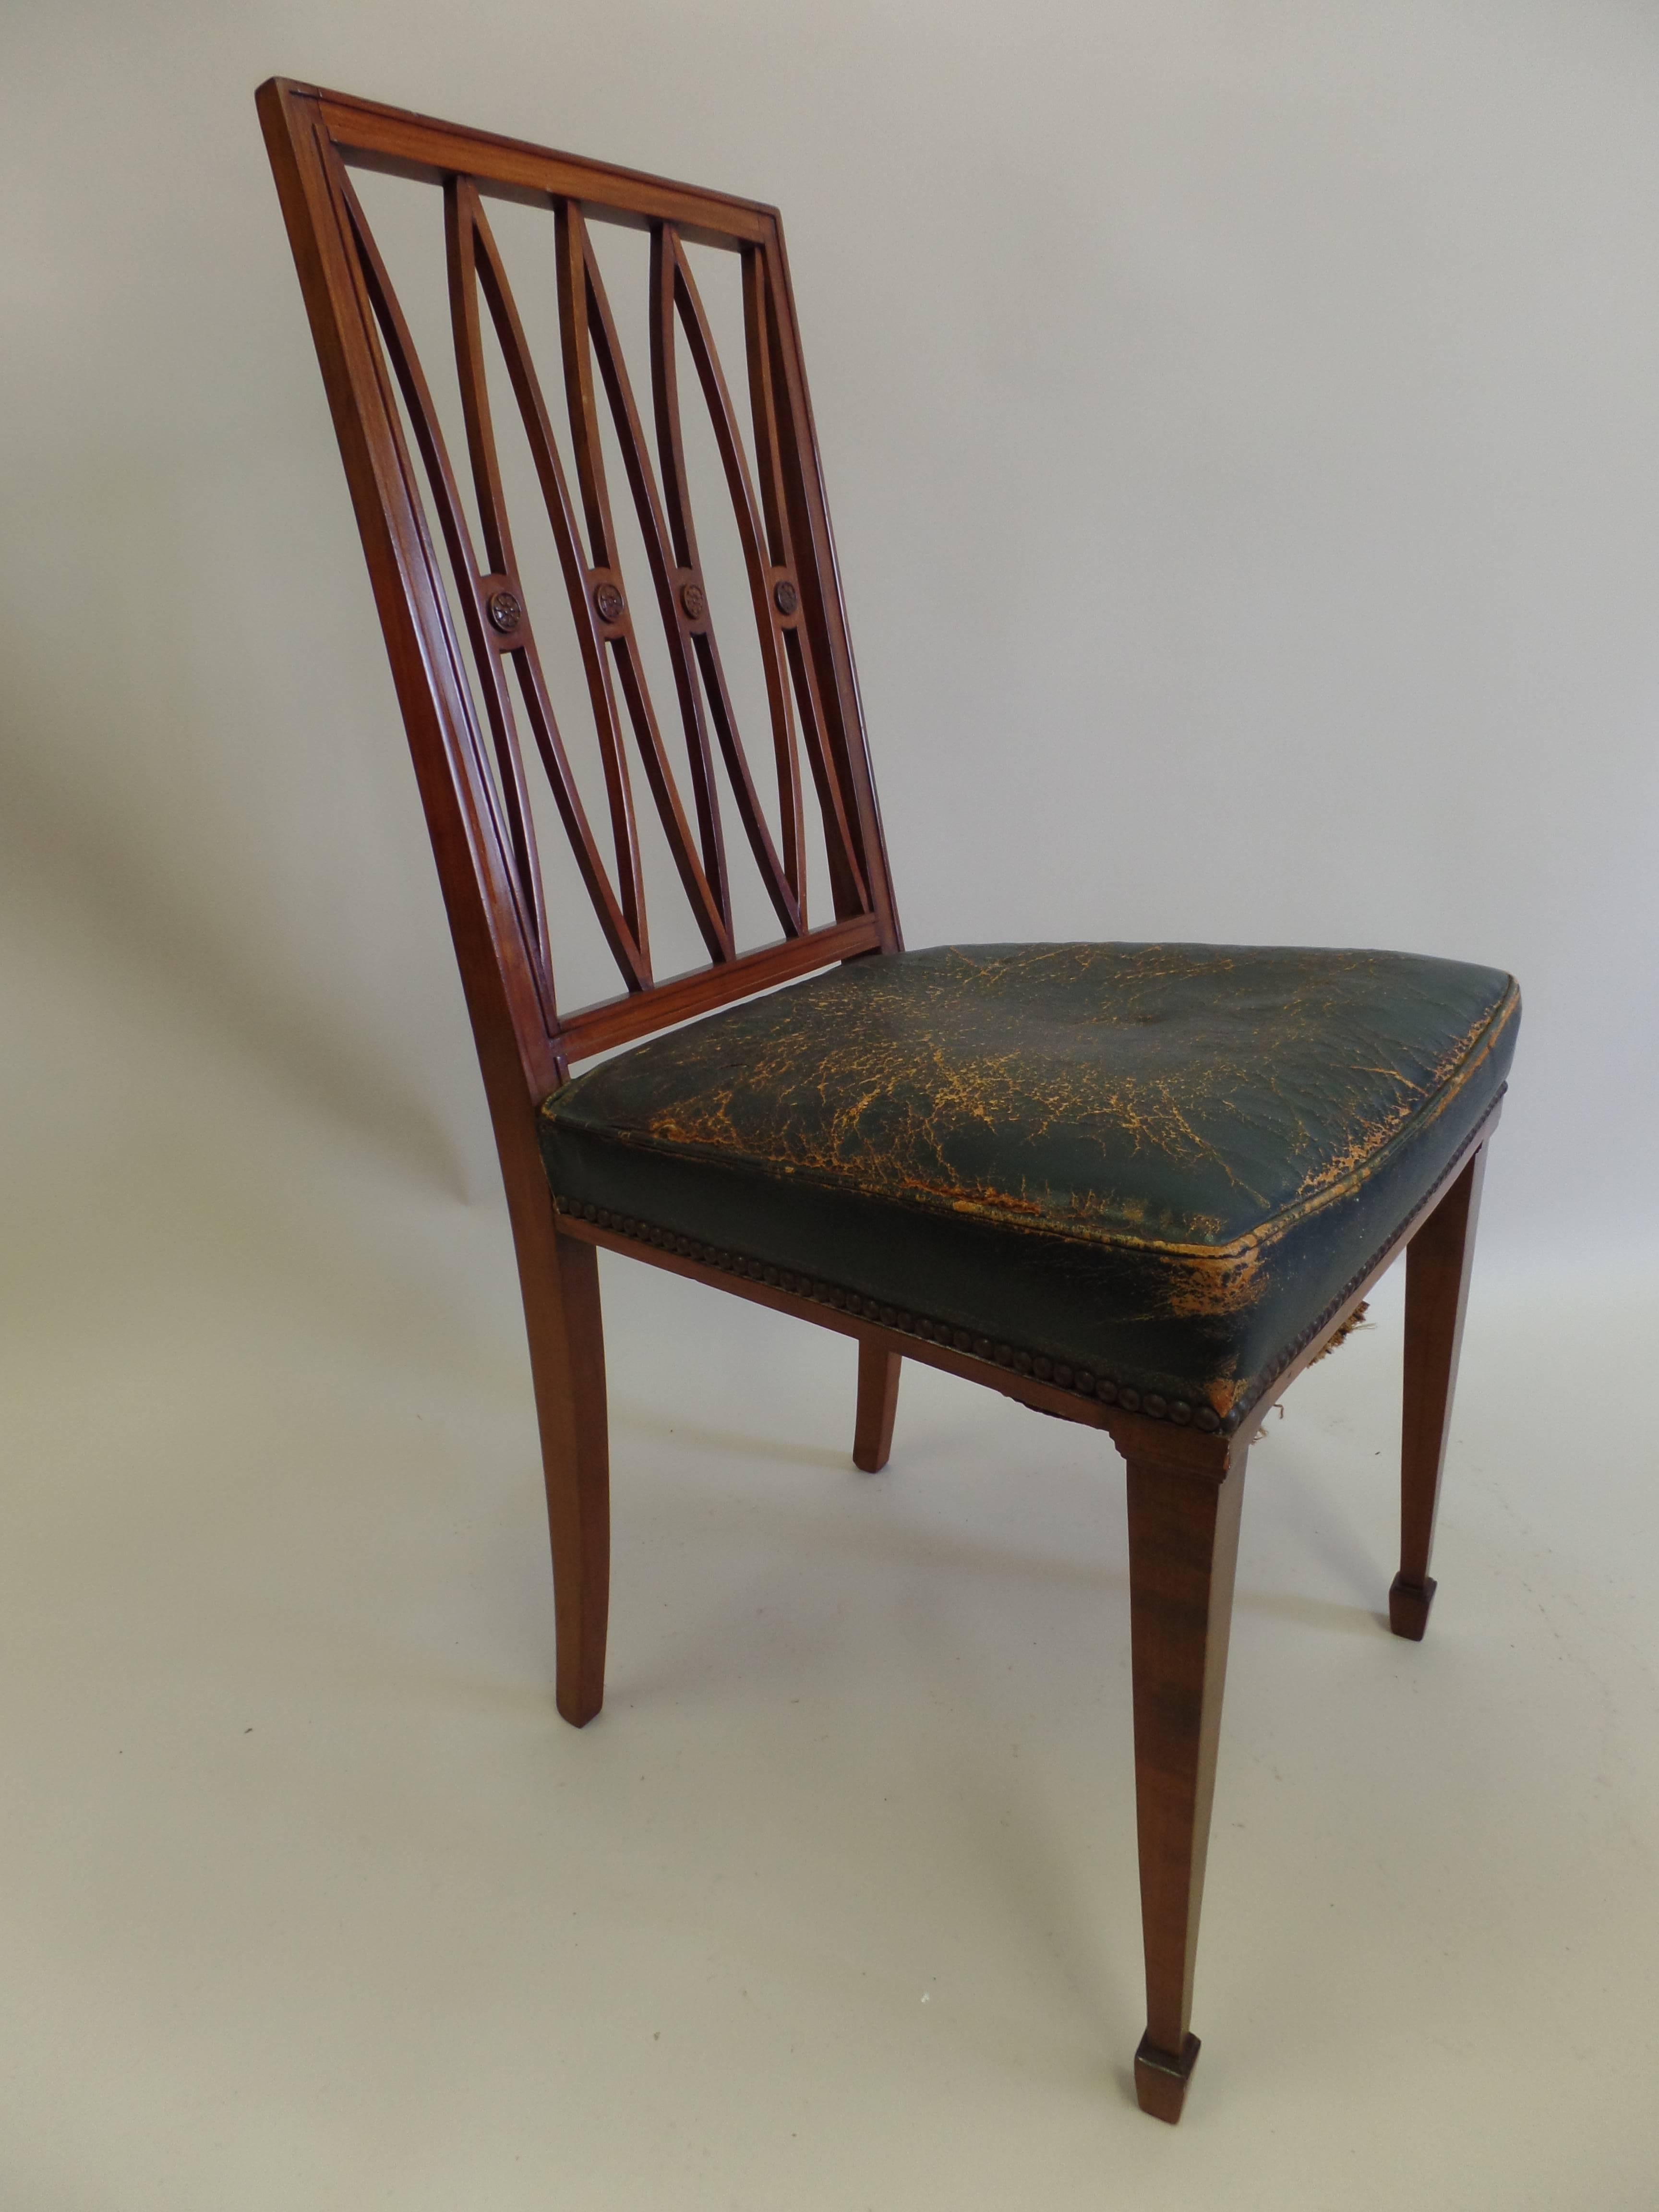 Pair of refined French modern neoclassical desk chairs / side chairs attributed to Andre Arbus with elegant tapered front legs ending in blocked finial feet balanced with rear saber legs, supporting a leather seat and cut-out backrest in the form of